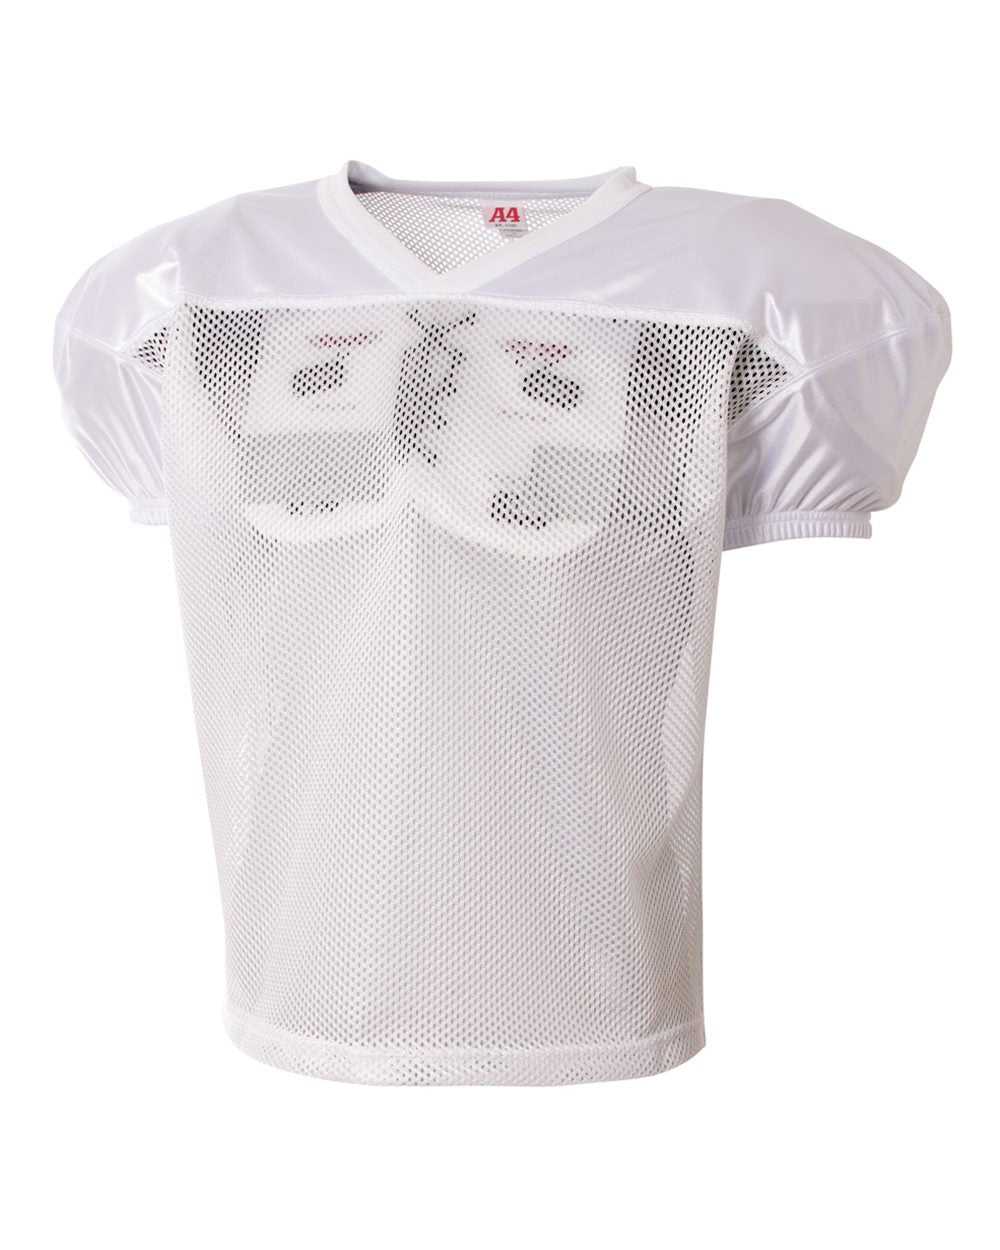 A4 NB4260 Youth Drills Practice Jersey - White - HIT A Double